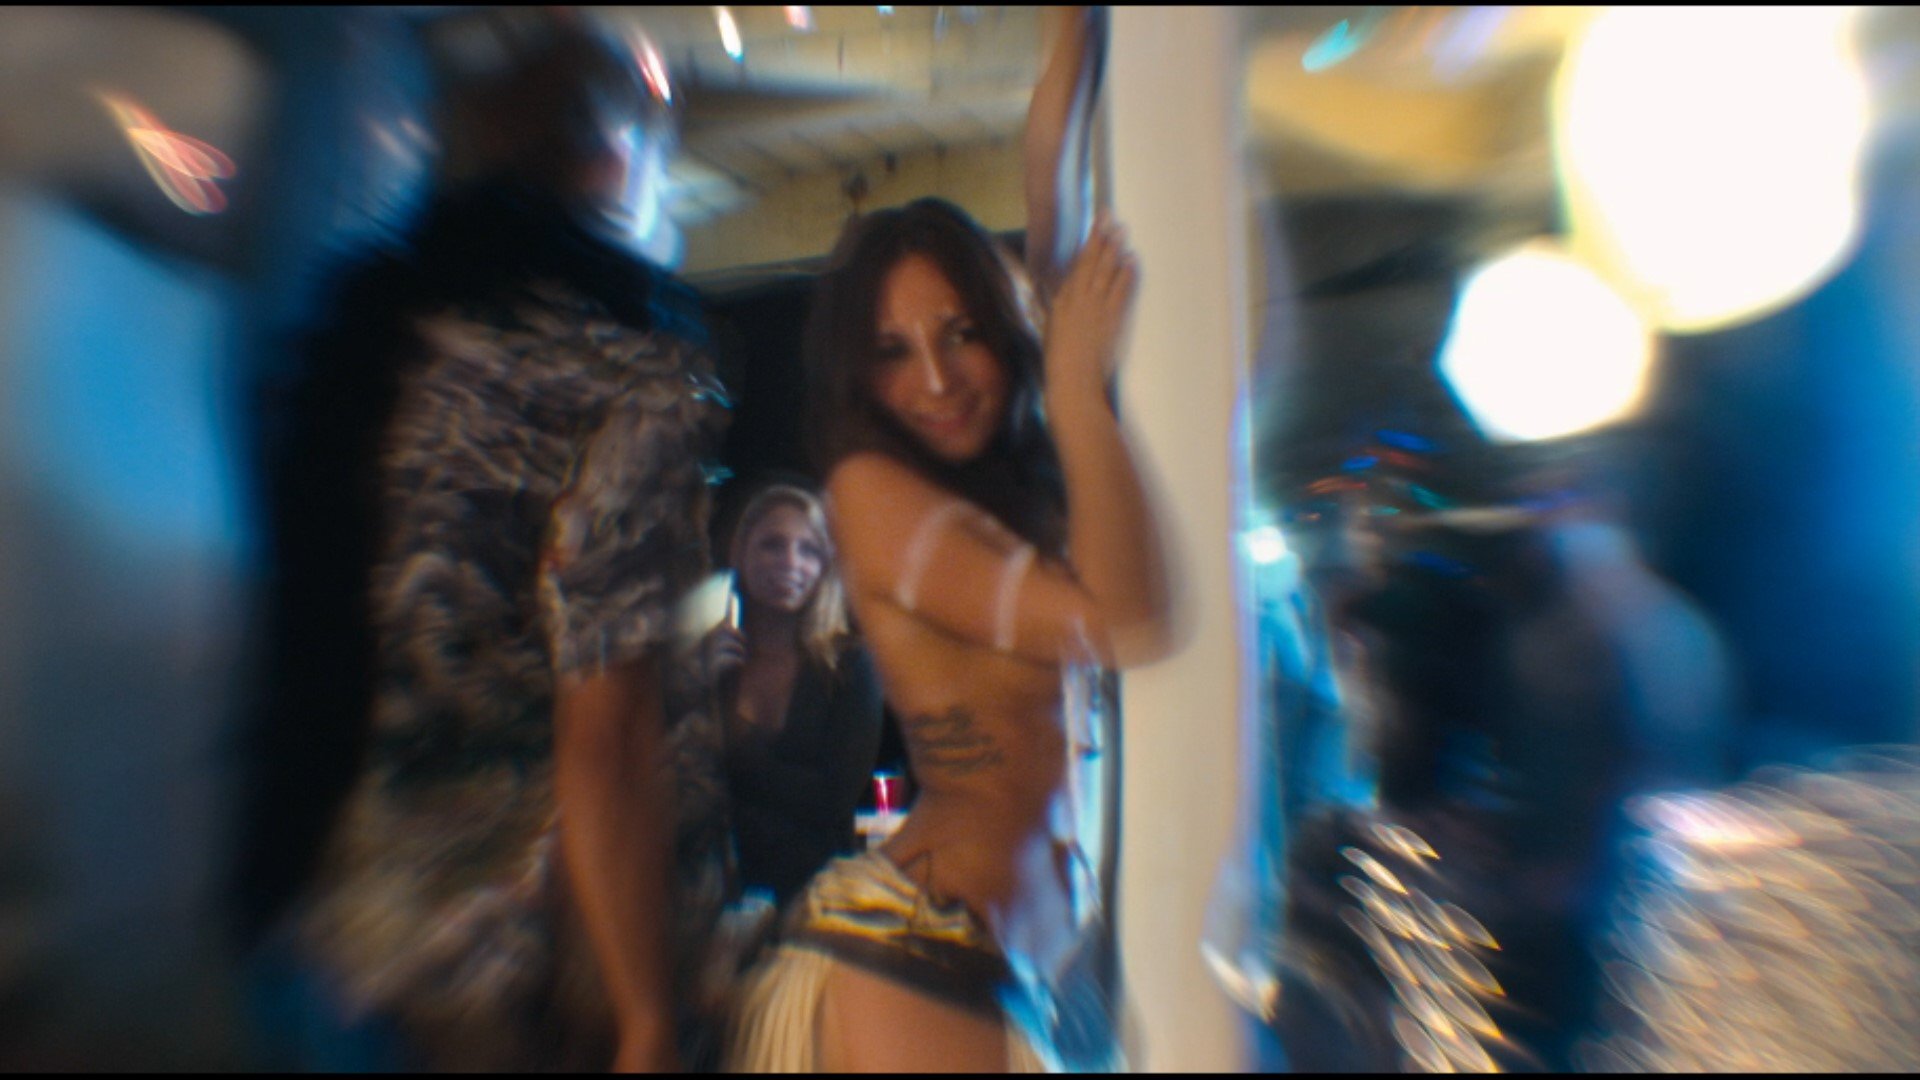 Naked Briana Evigan In Rites Of Passage